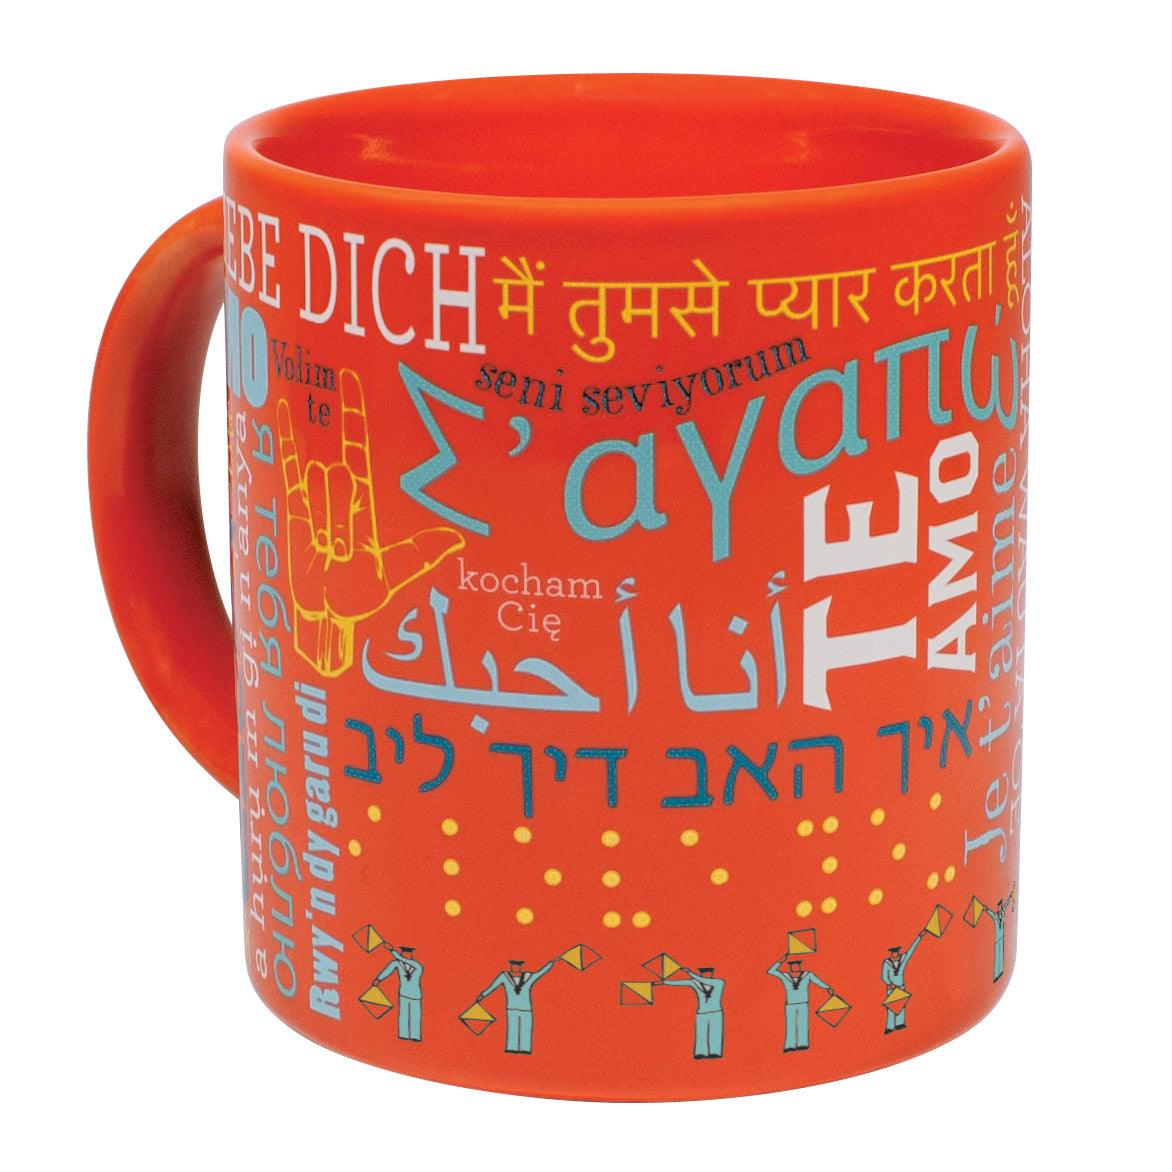 Product photo of I Love You Mug, a novelty gift manufactured by The Unemployed Philosophers Guild.